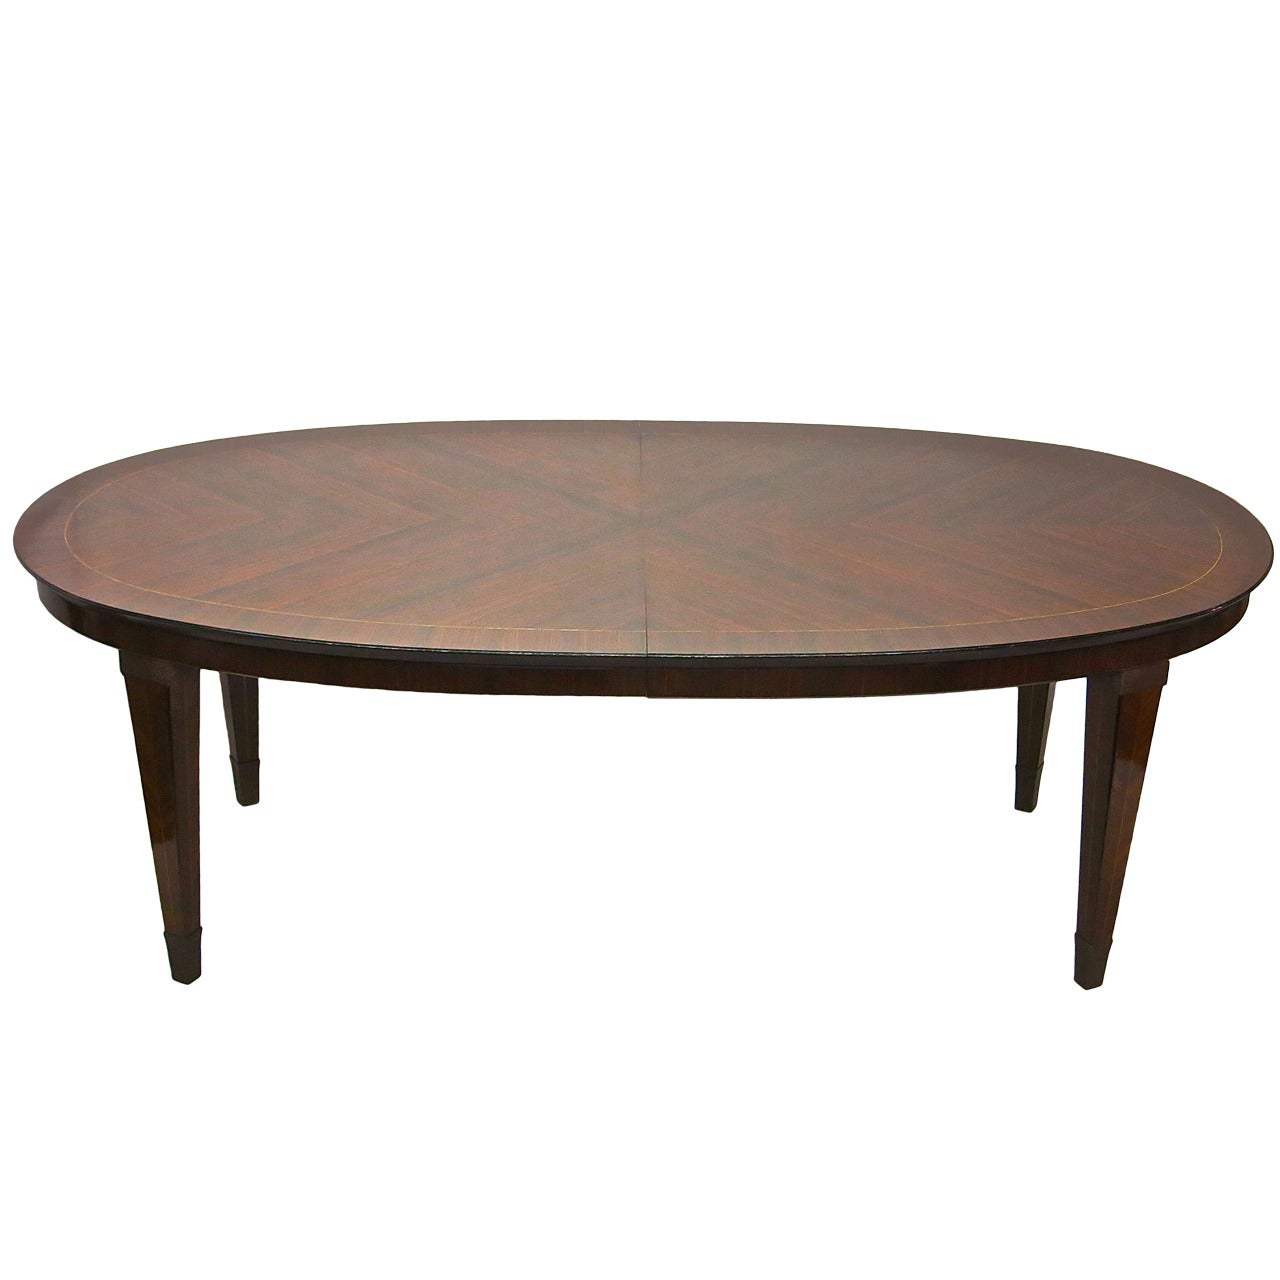 Dining Table designed by Dominique circa 1940 Design, Made in France For Sale